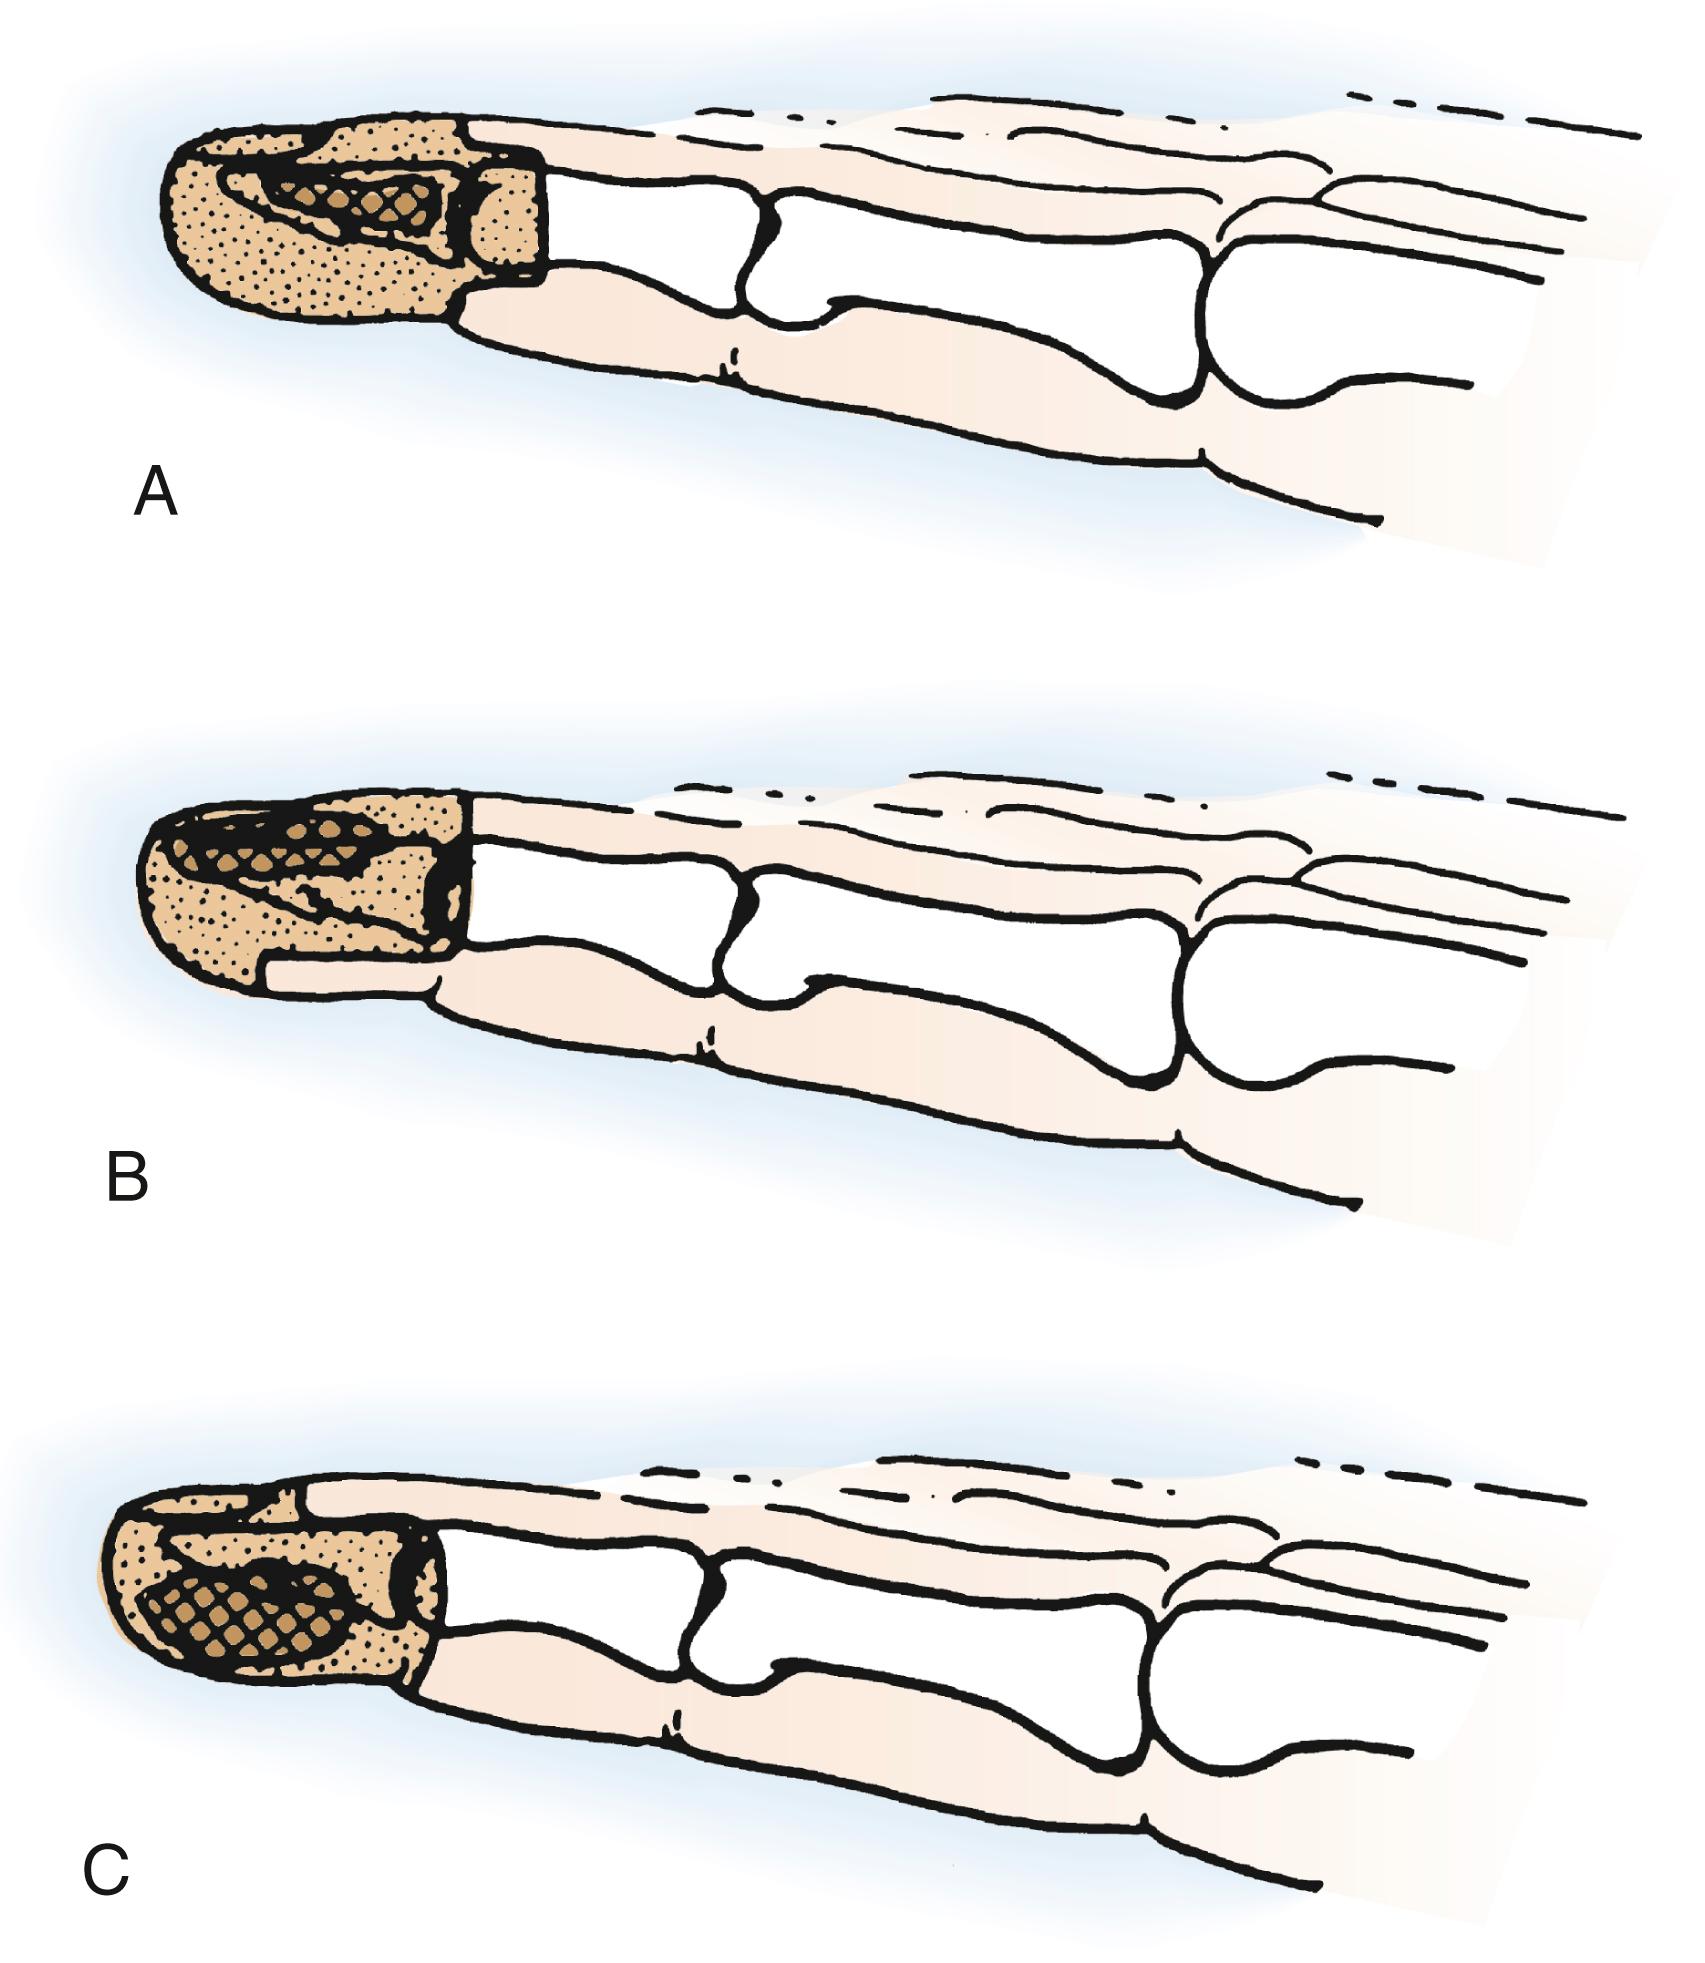 Fig. 59.3, Malignant lesions of the terminal segment of the finger generally require amputation at or proximal to the DIP joint. A, Intraosseous distal phalangeal tumors are amputated at or proximal to the joint along with combined dorsal and volar flap closure. B, Dorsal lesions are treated by appropriate tumor excision with volar flap closure. C, After removal of a palmar tumor, dorsal flap closure may be possible.